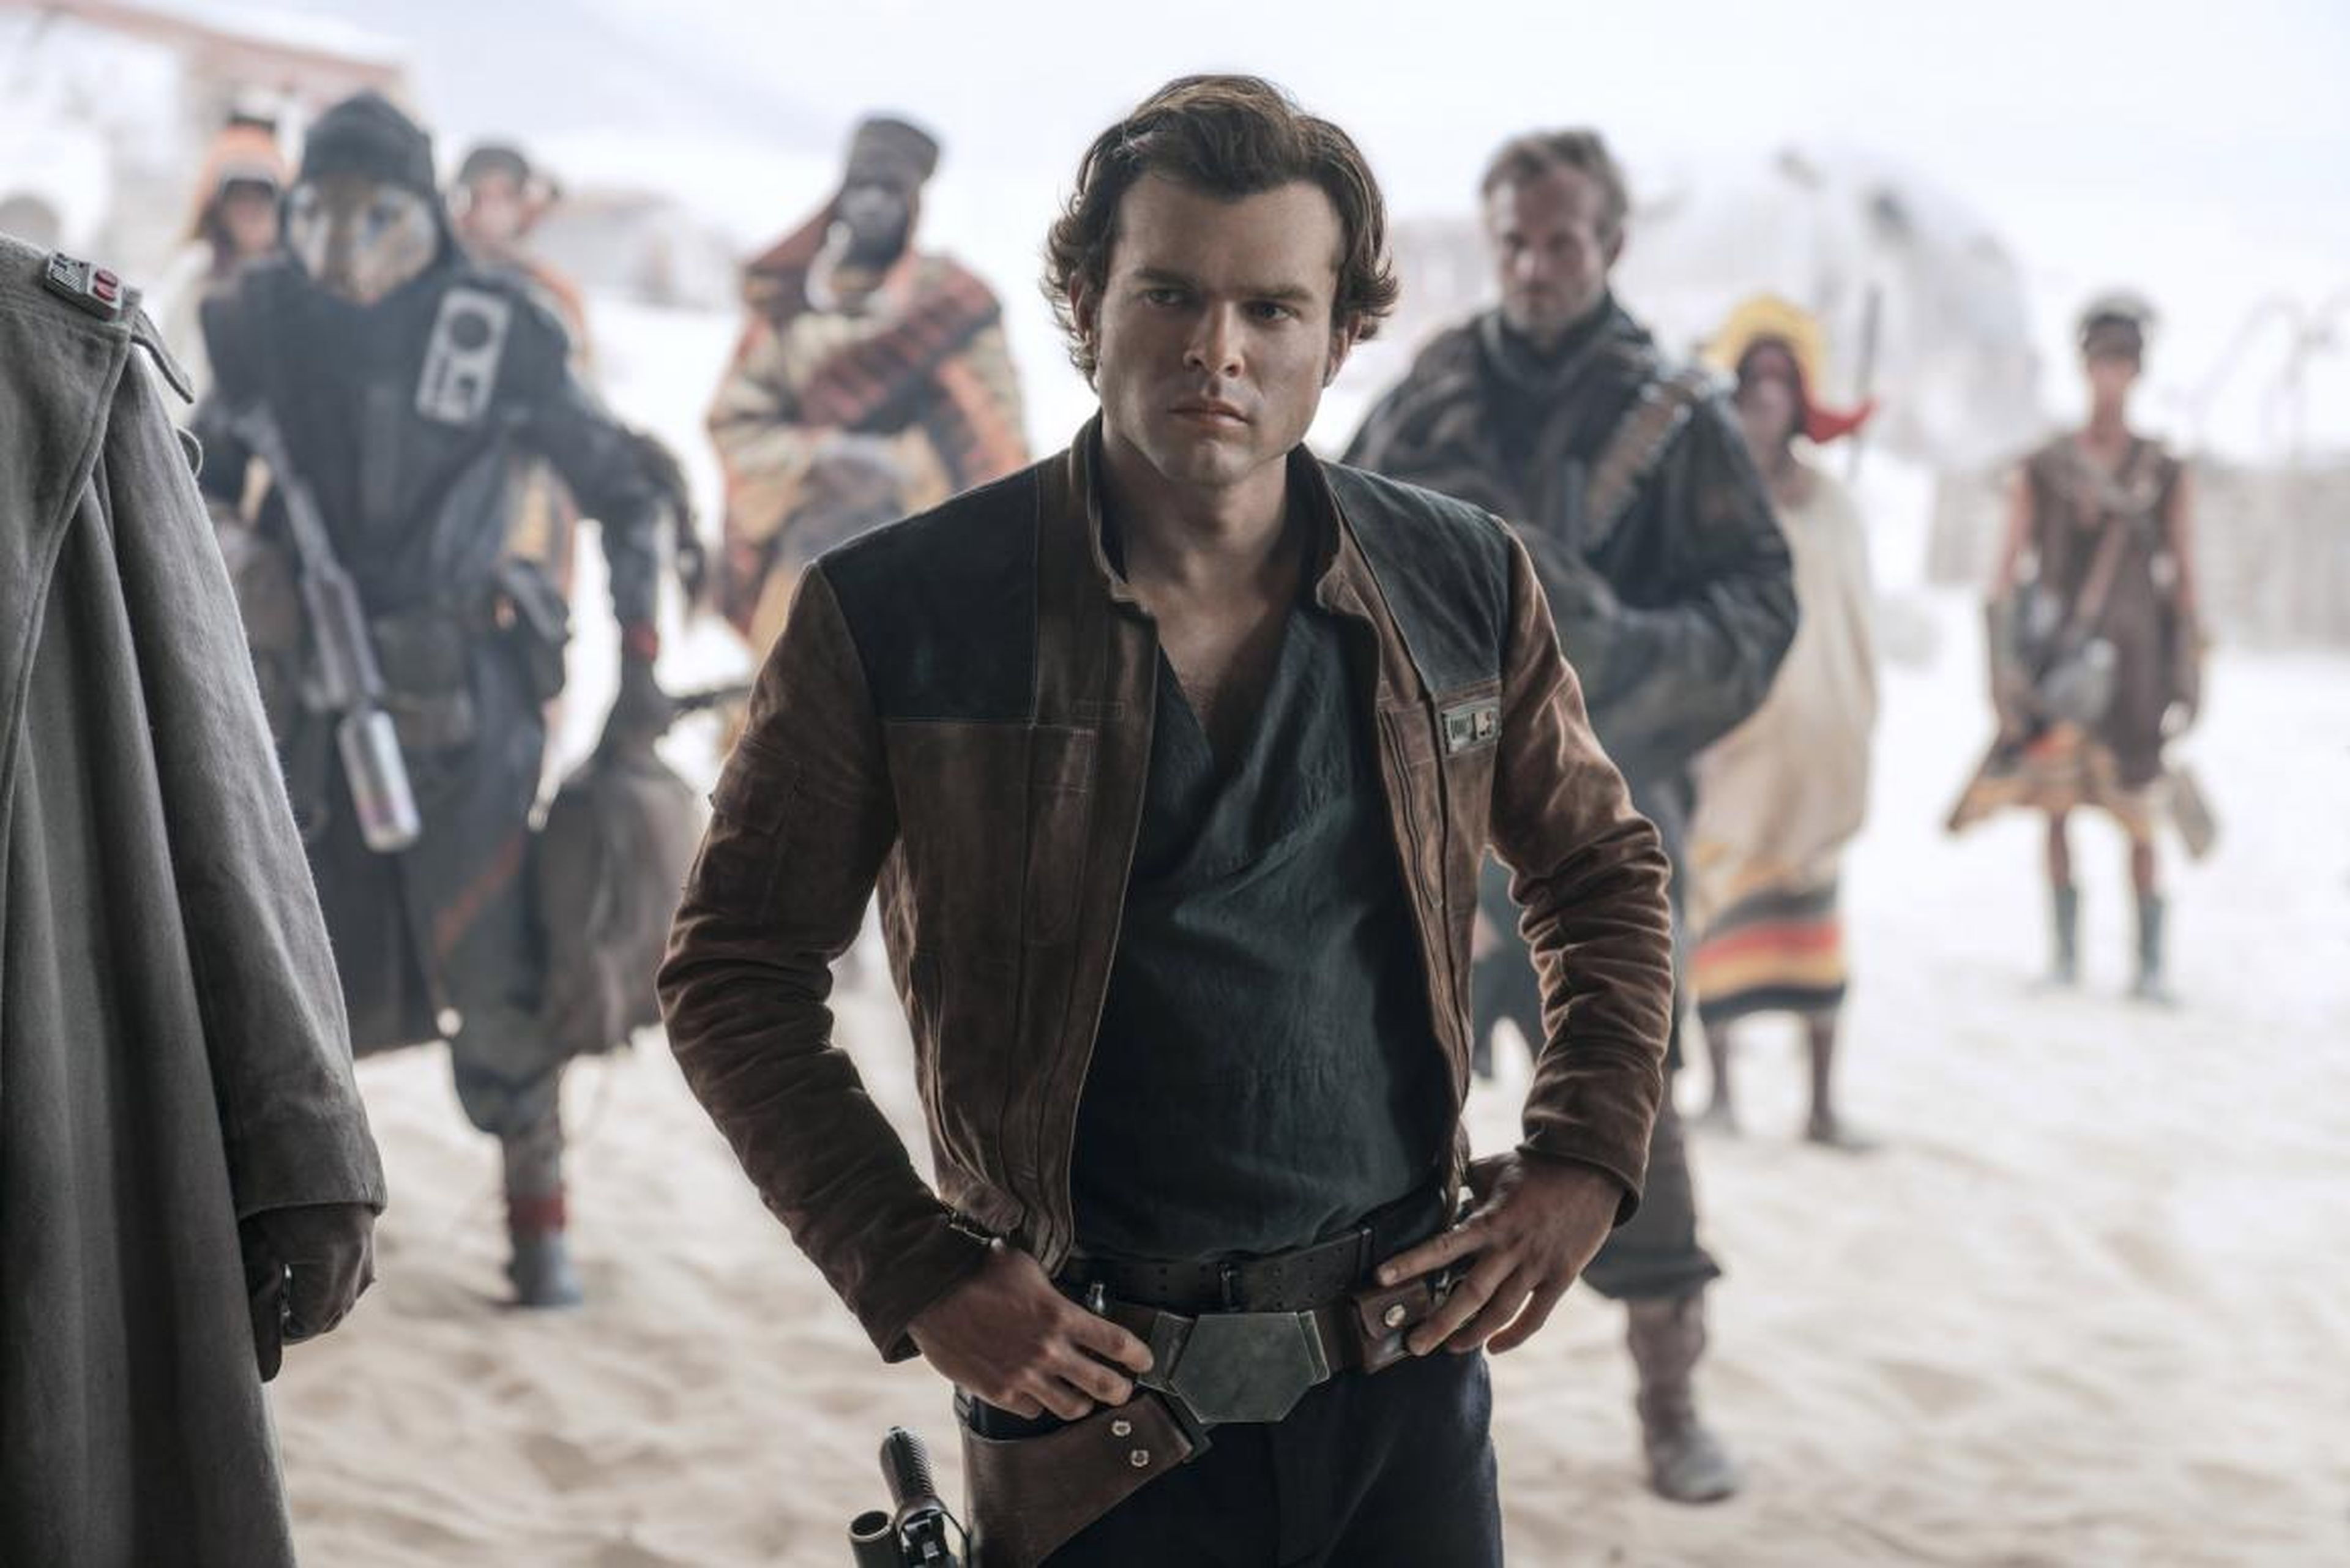 10. "Solo: A Star Wars Story" (2018)